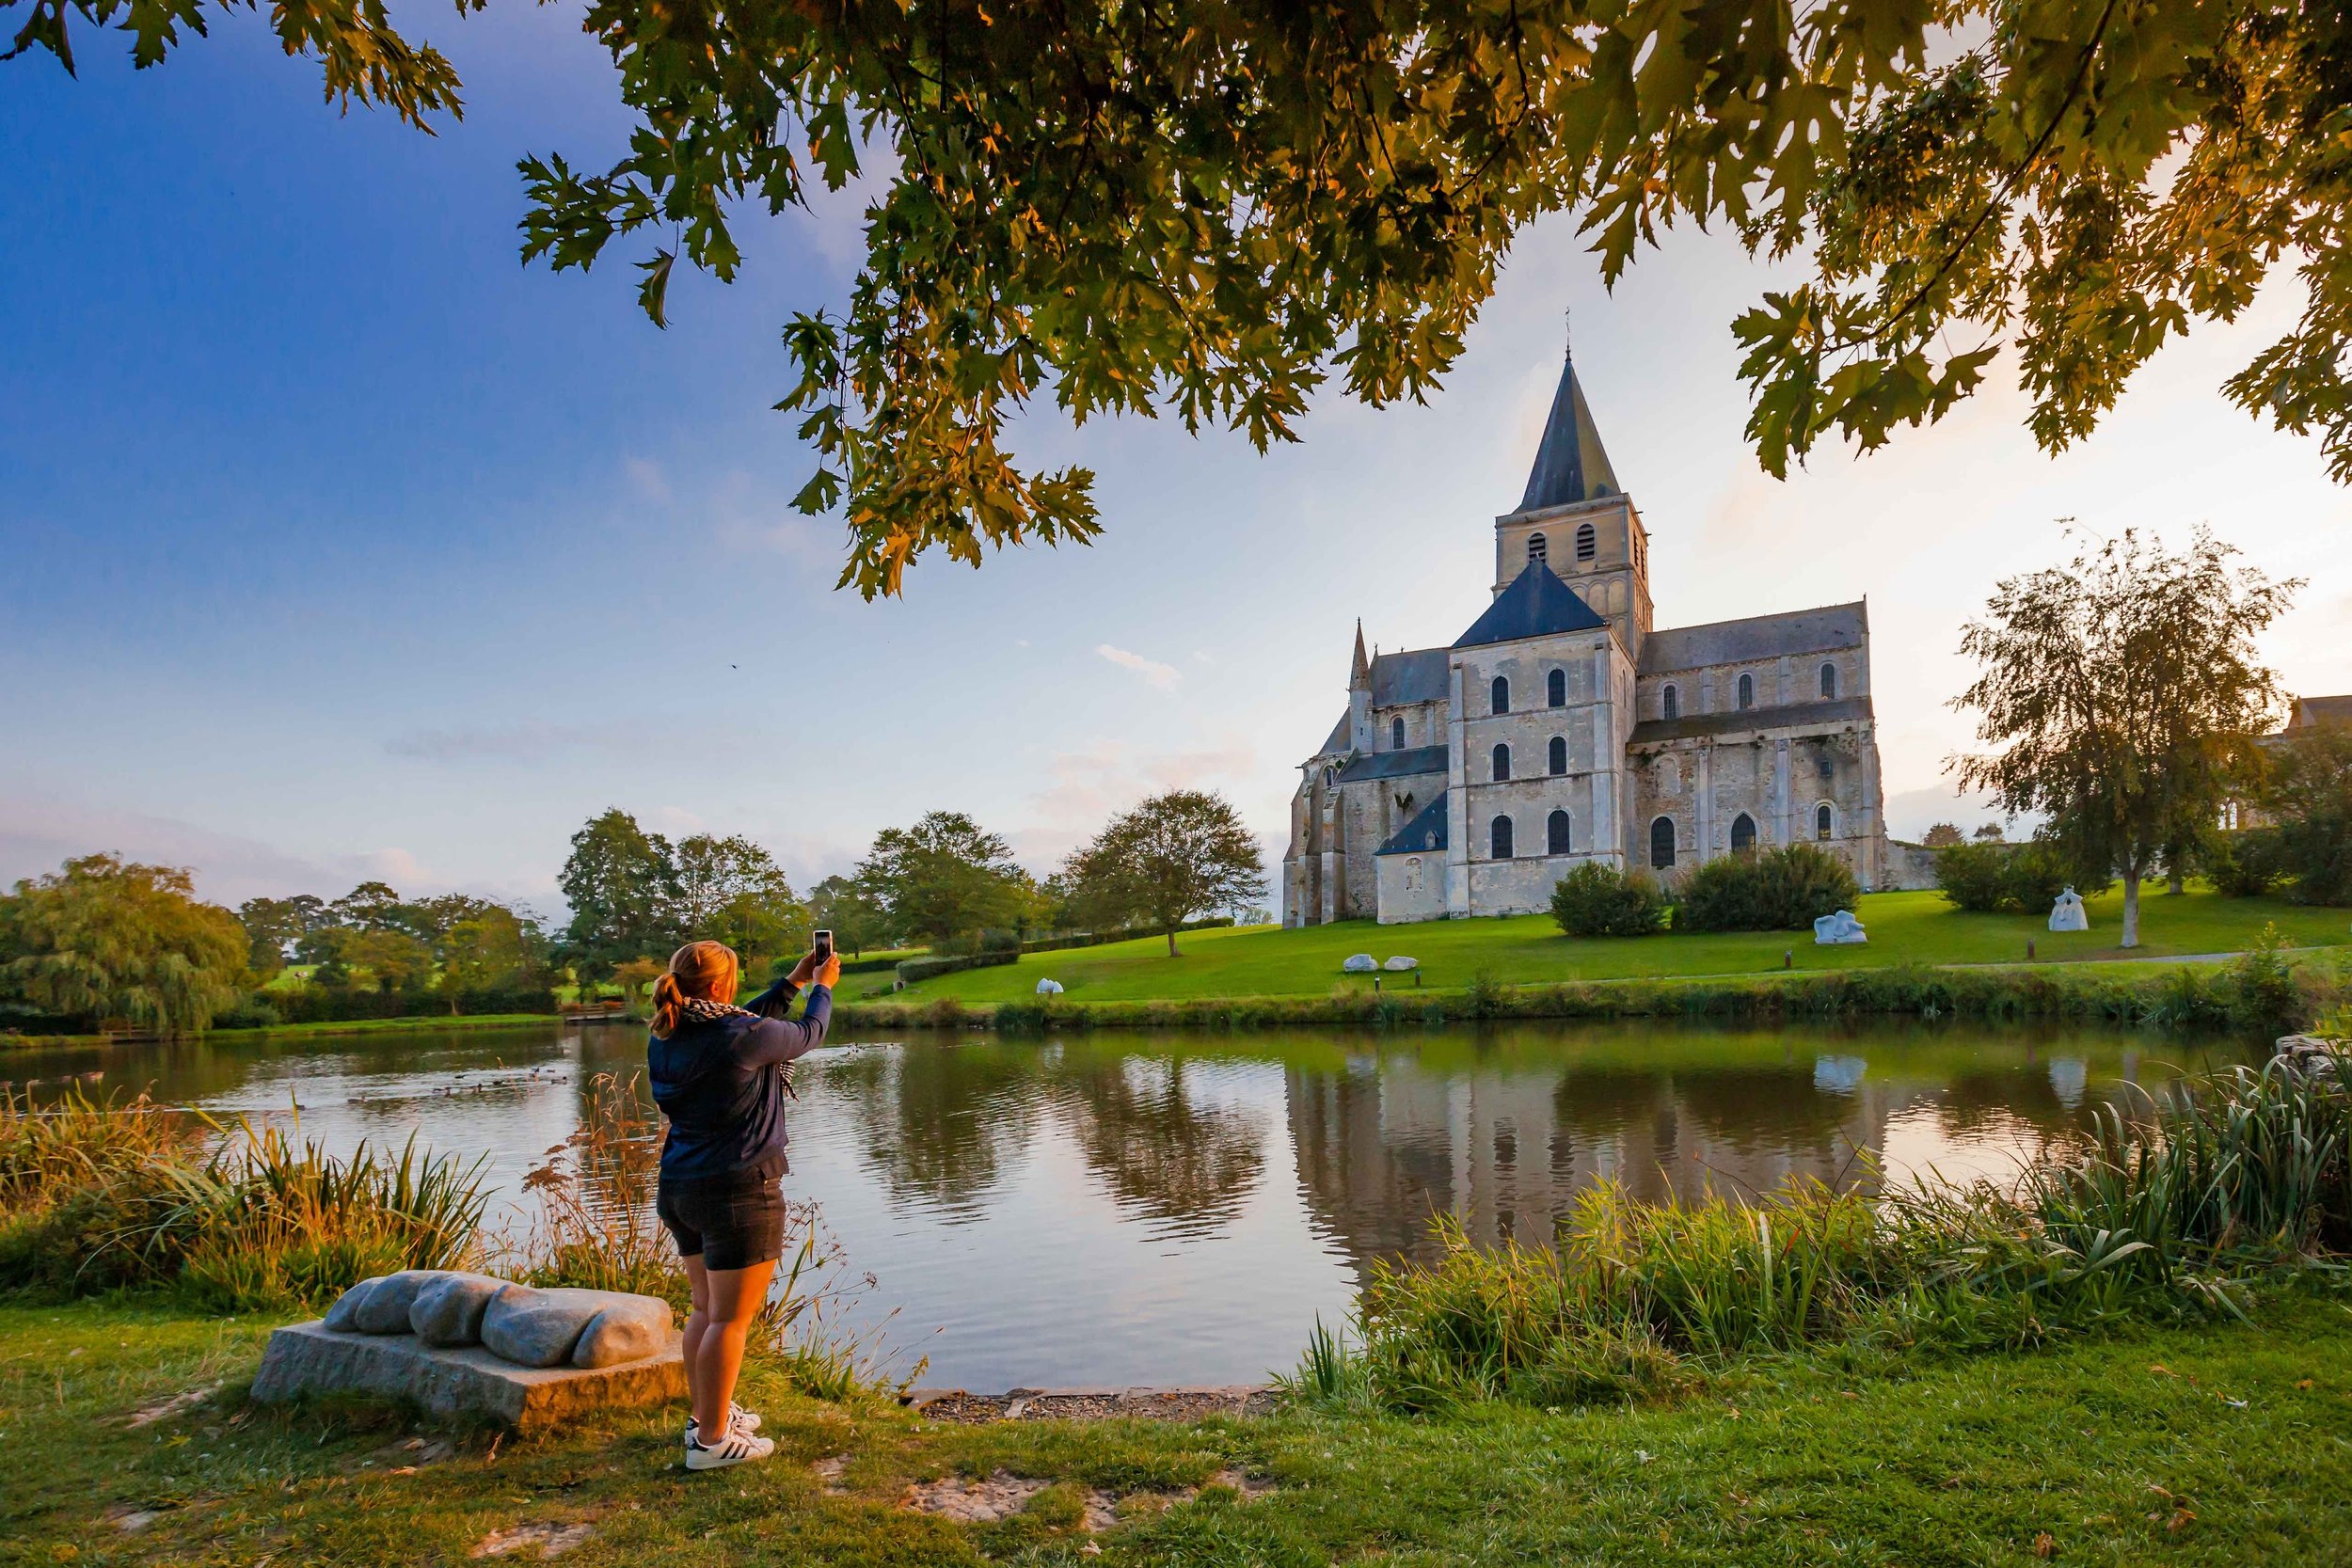 A woman capturing a picture of a building by a lake during her weekend getaway in France.